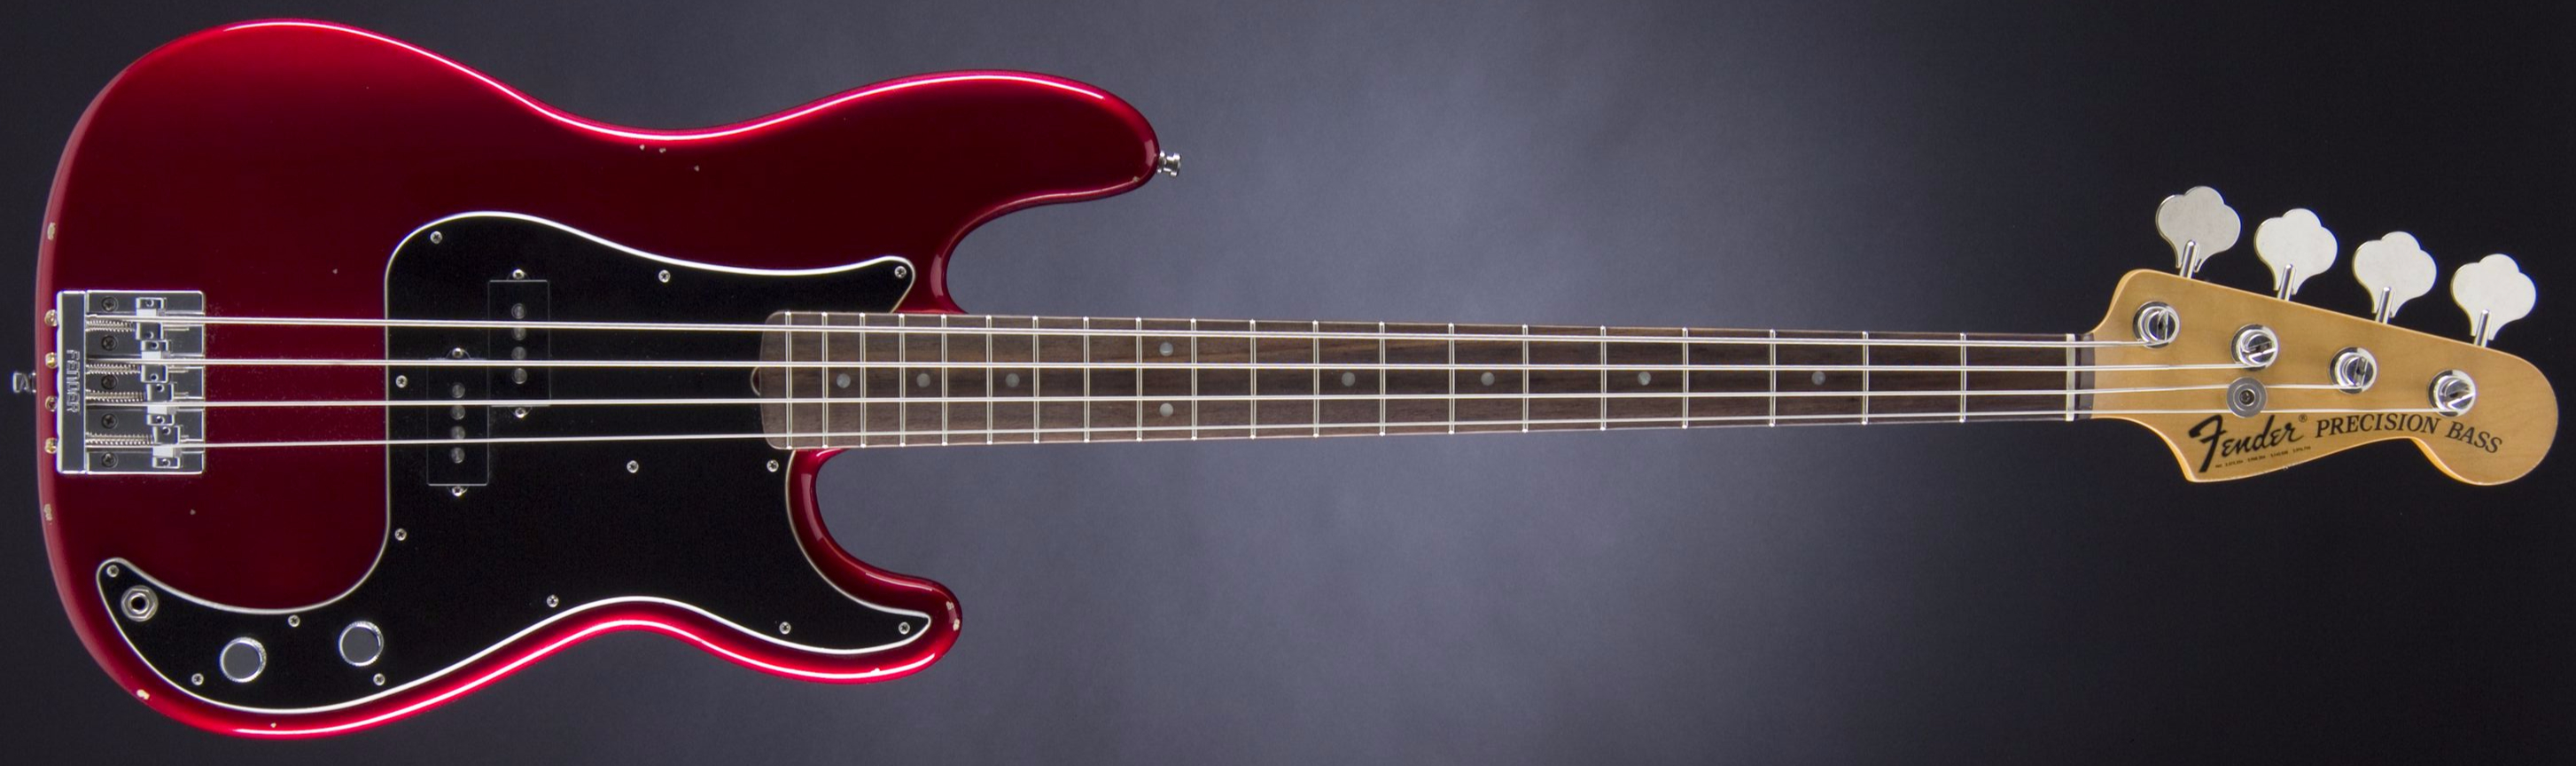 Fender AS Nate Mendel P-Bass RW CAR Candy Apple Red | MUSIC STORE  professional